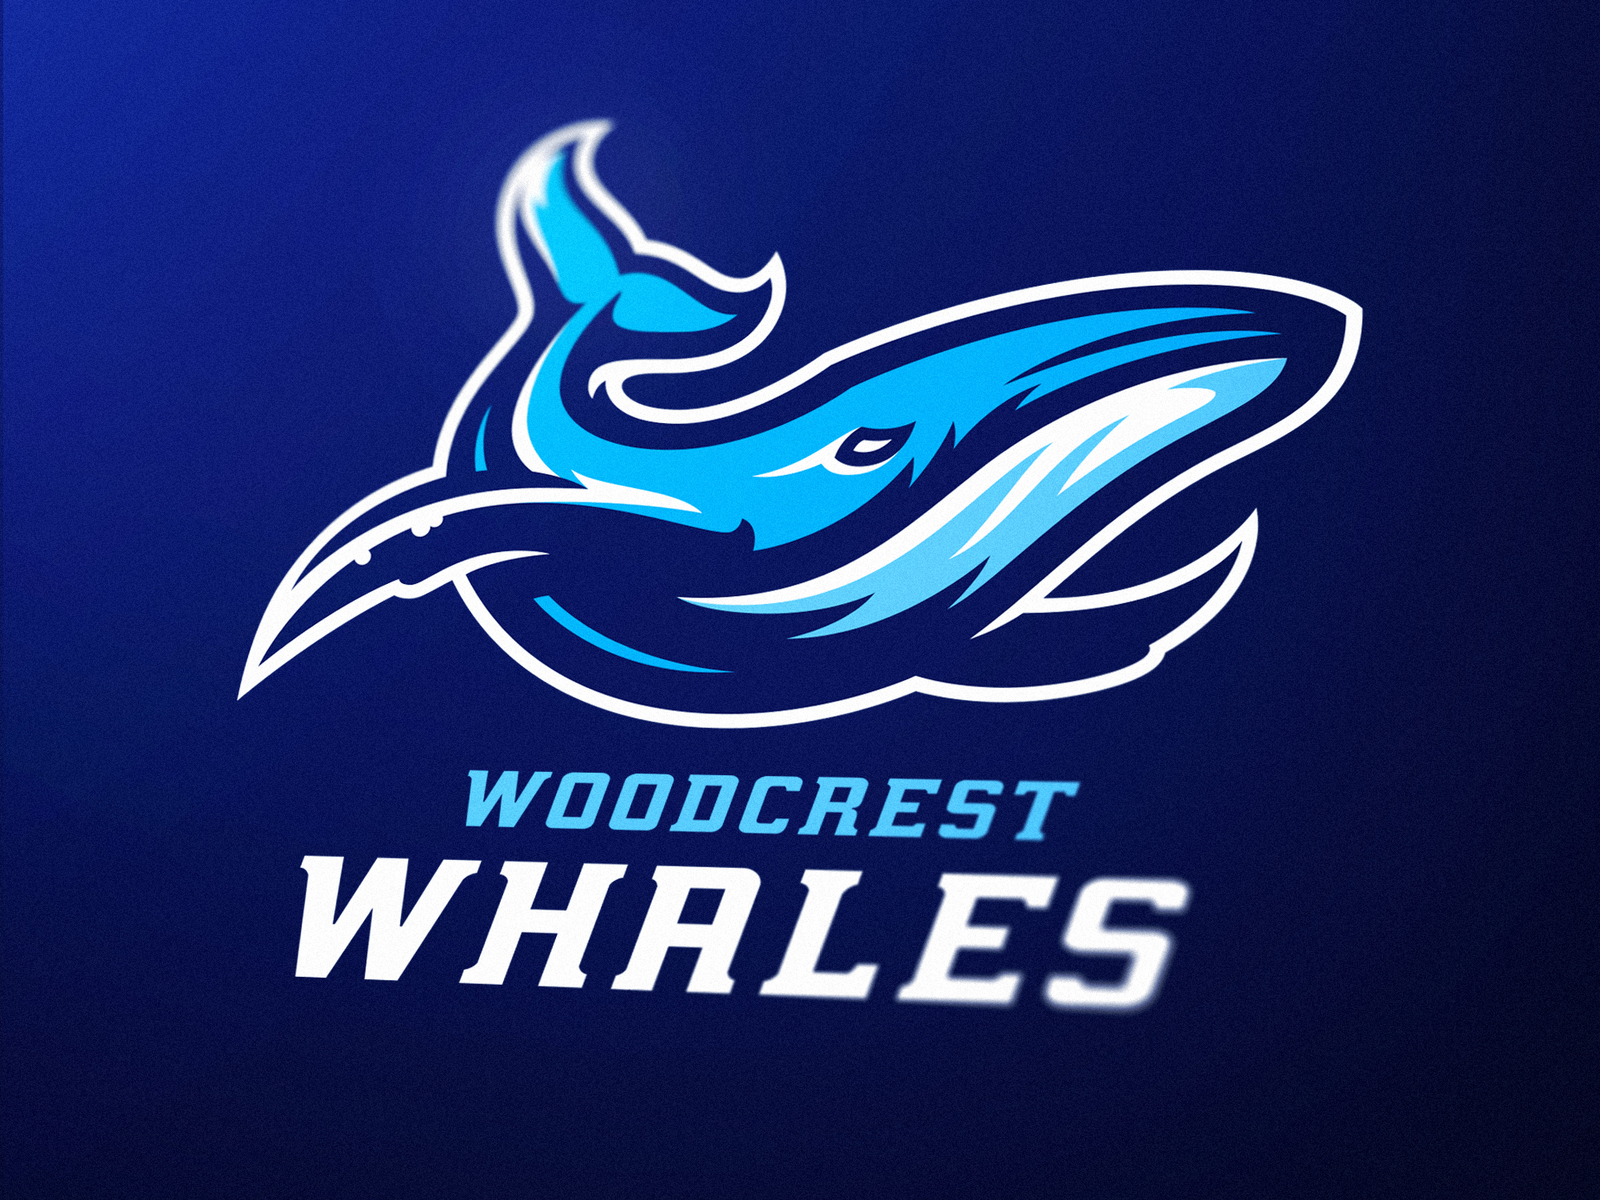 Woodcrest Whales Sports Logo by Derrick Stratton on Dribbble